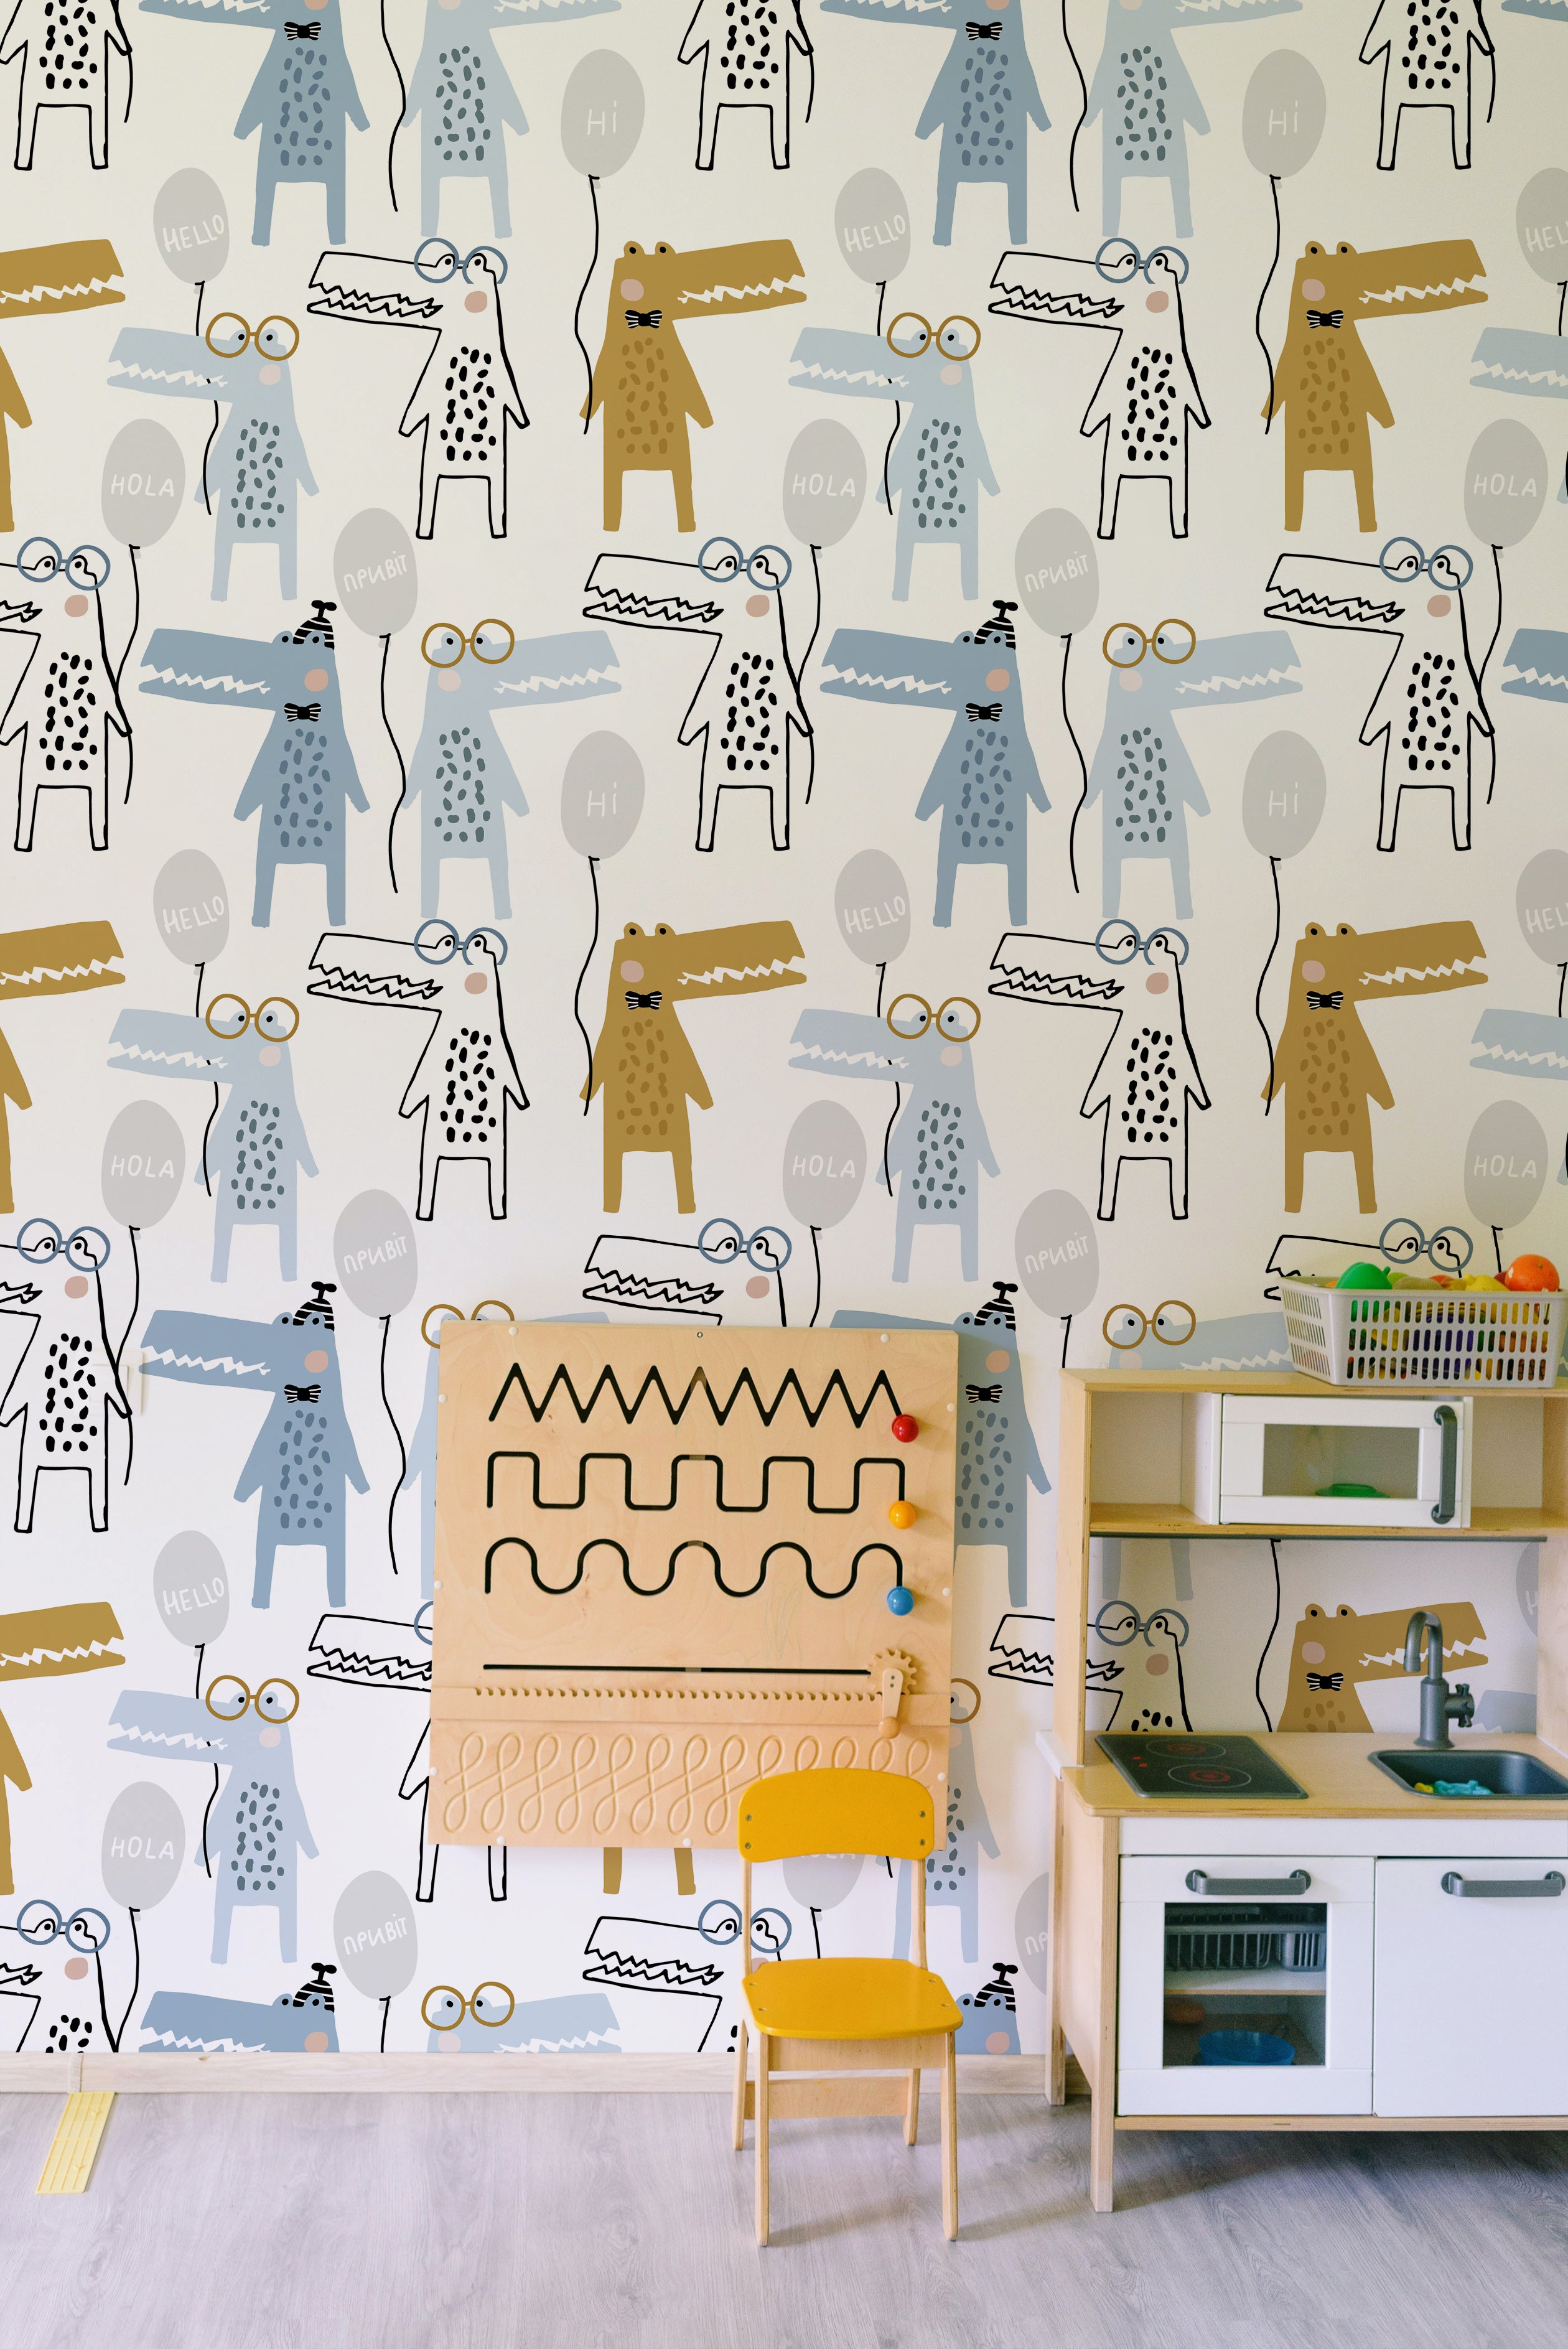 A playful children's room interior decorated with the "Party Crocs Wallpaper - 25 inches." The room includes a wooden play kitchen, a yellow chair, and a sensory board. The wallpaper adds a fun, creative touch with its colorful crocodile characters and friendly greetings in various languages.